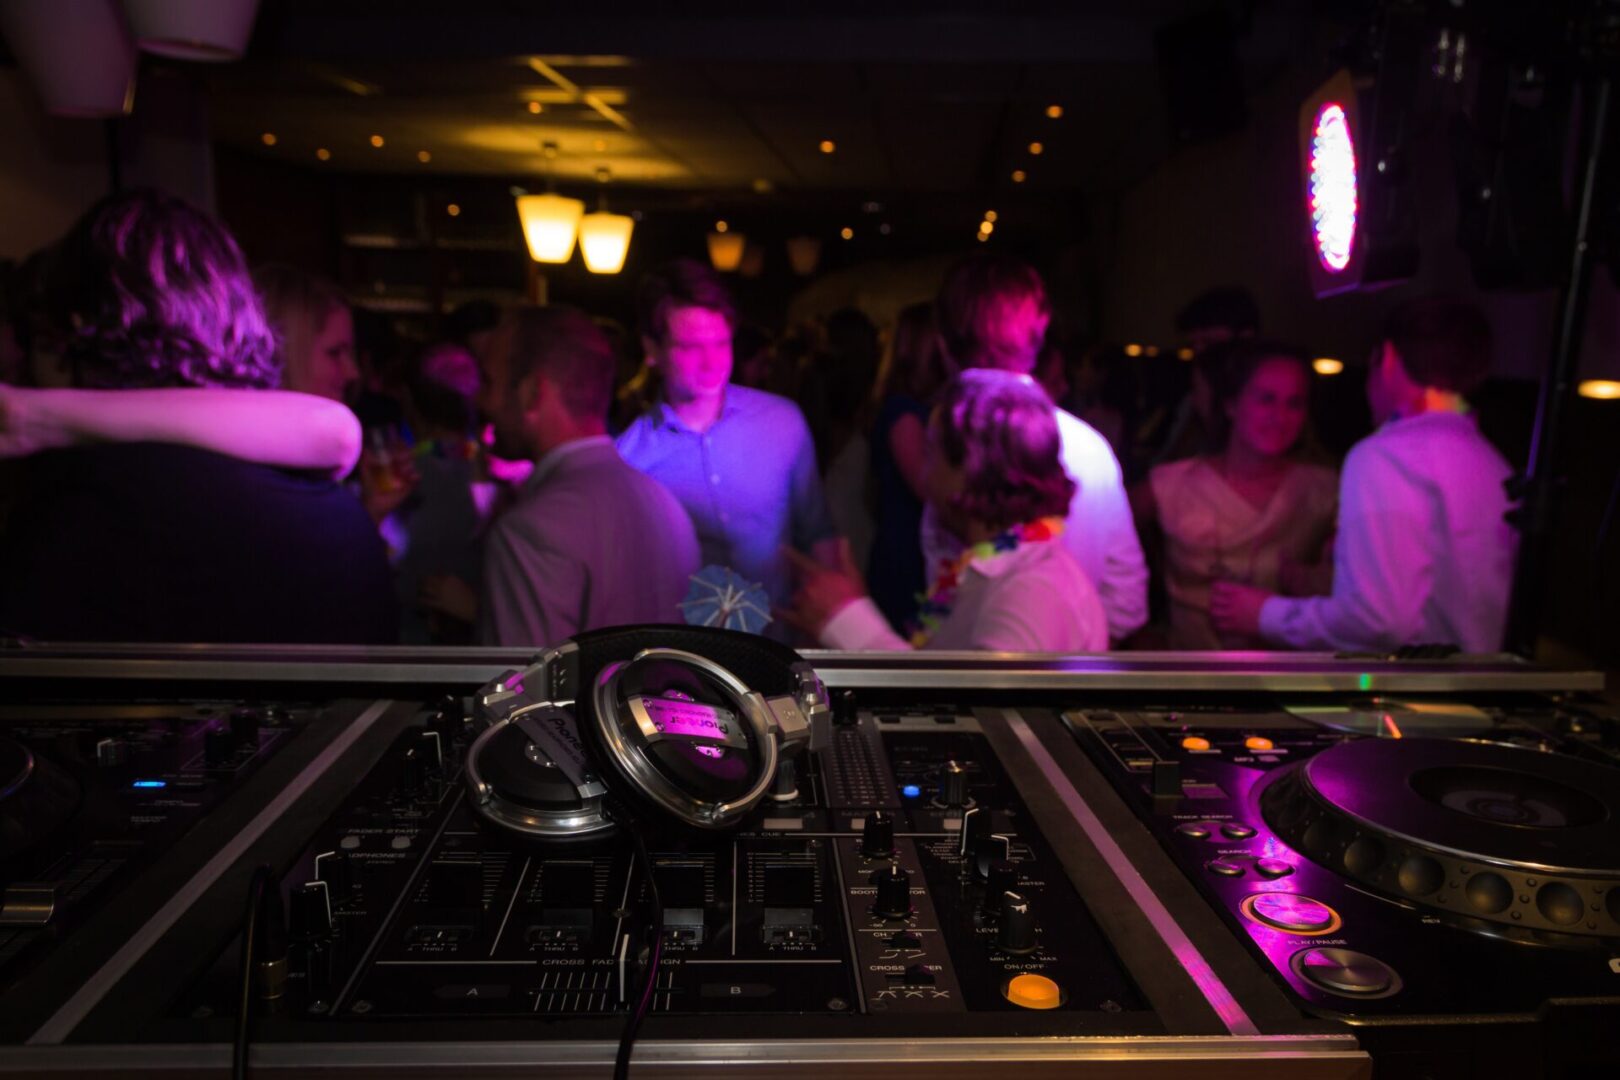 A dj 's table with headphones on it and people watching.